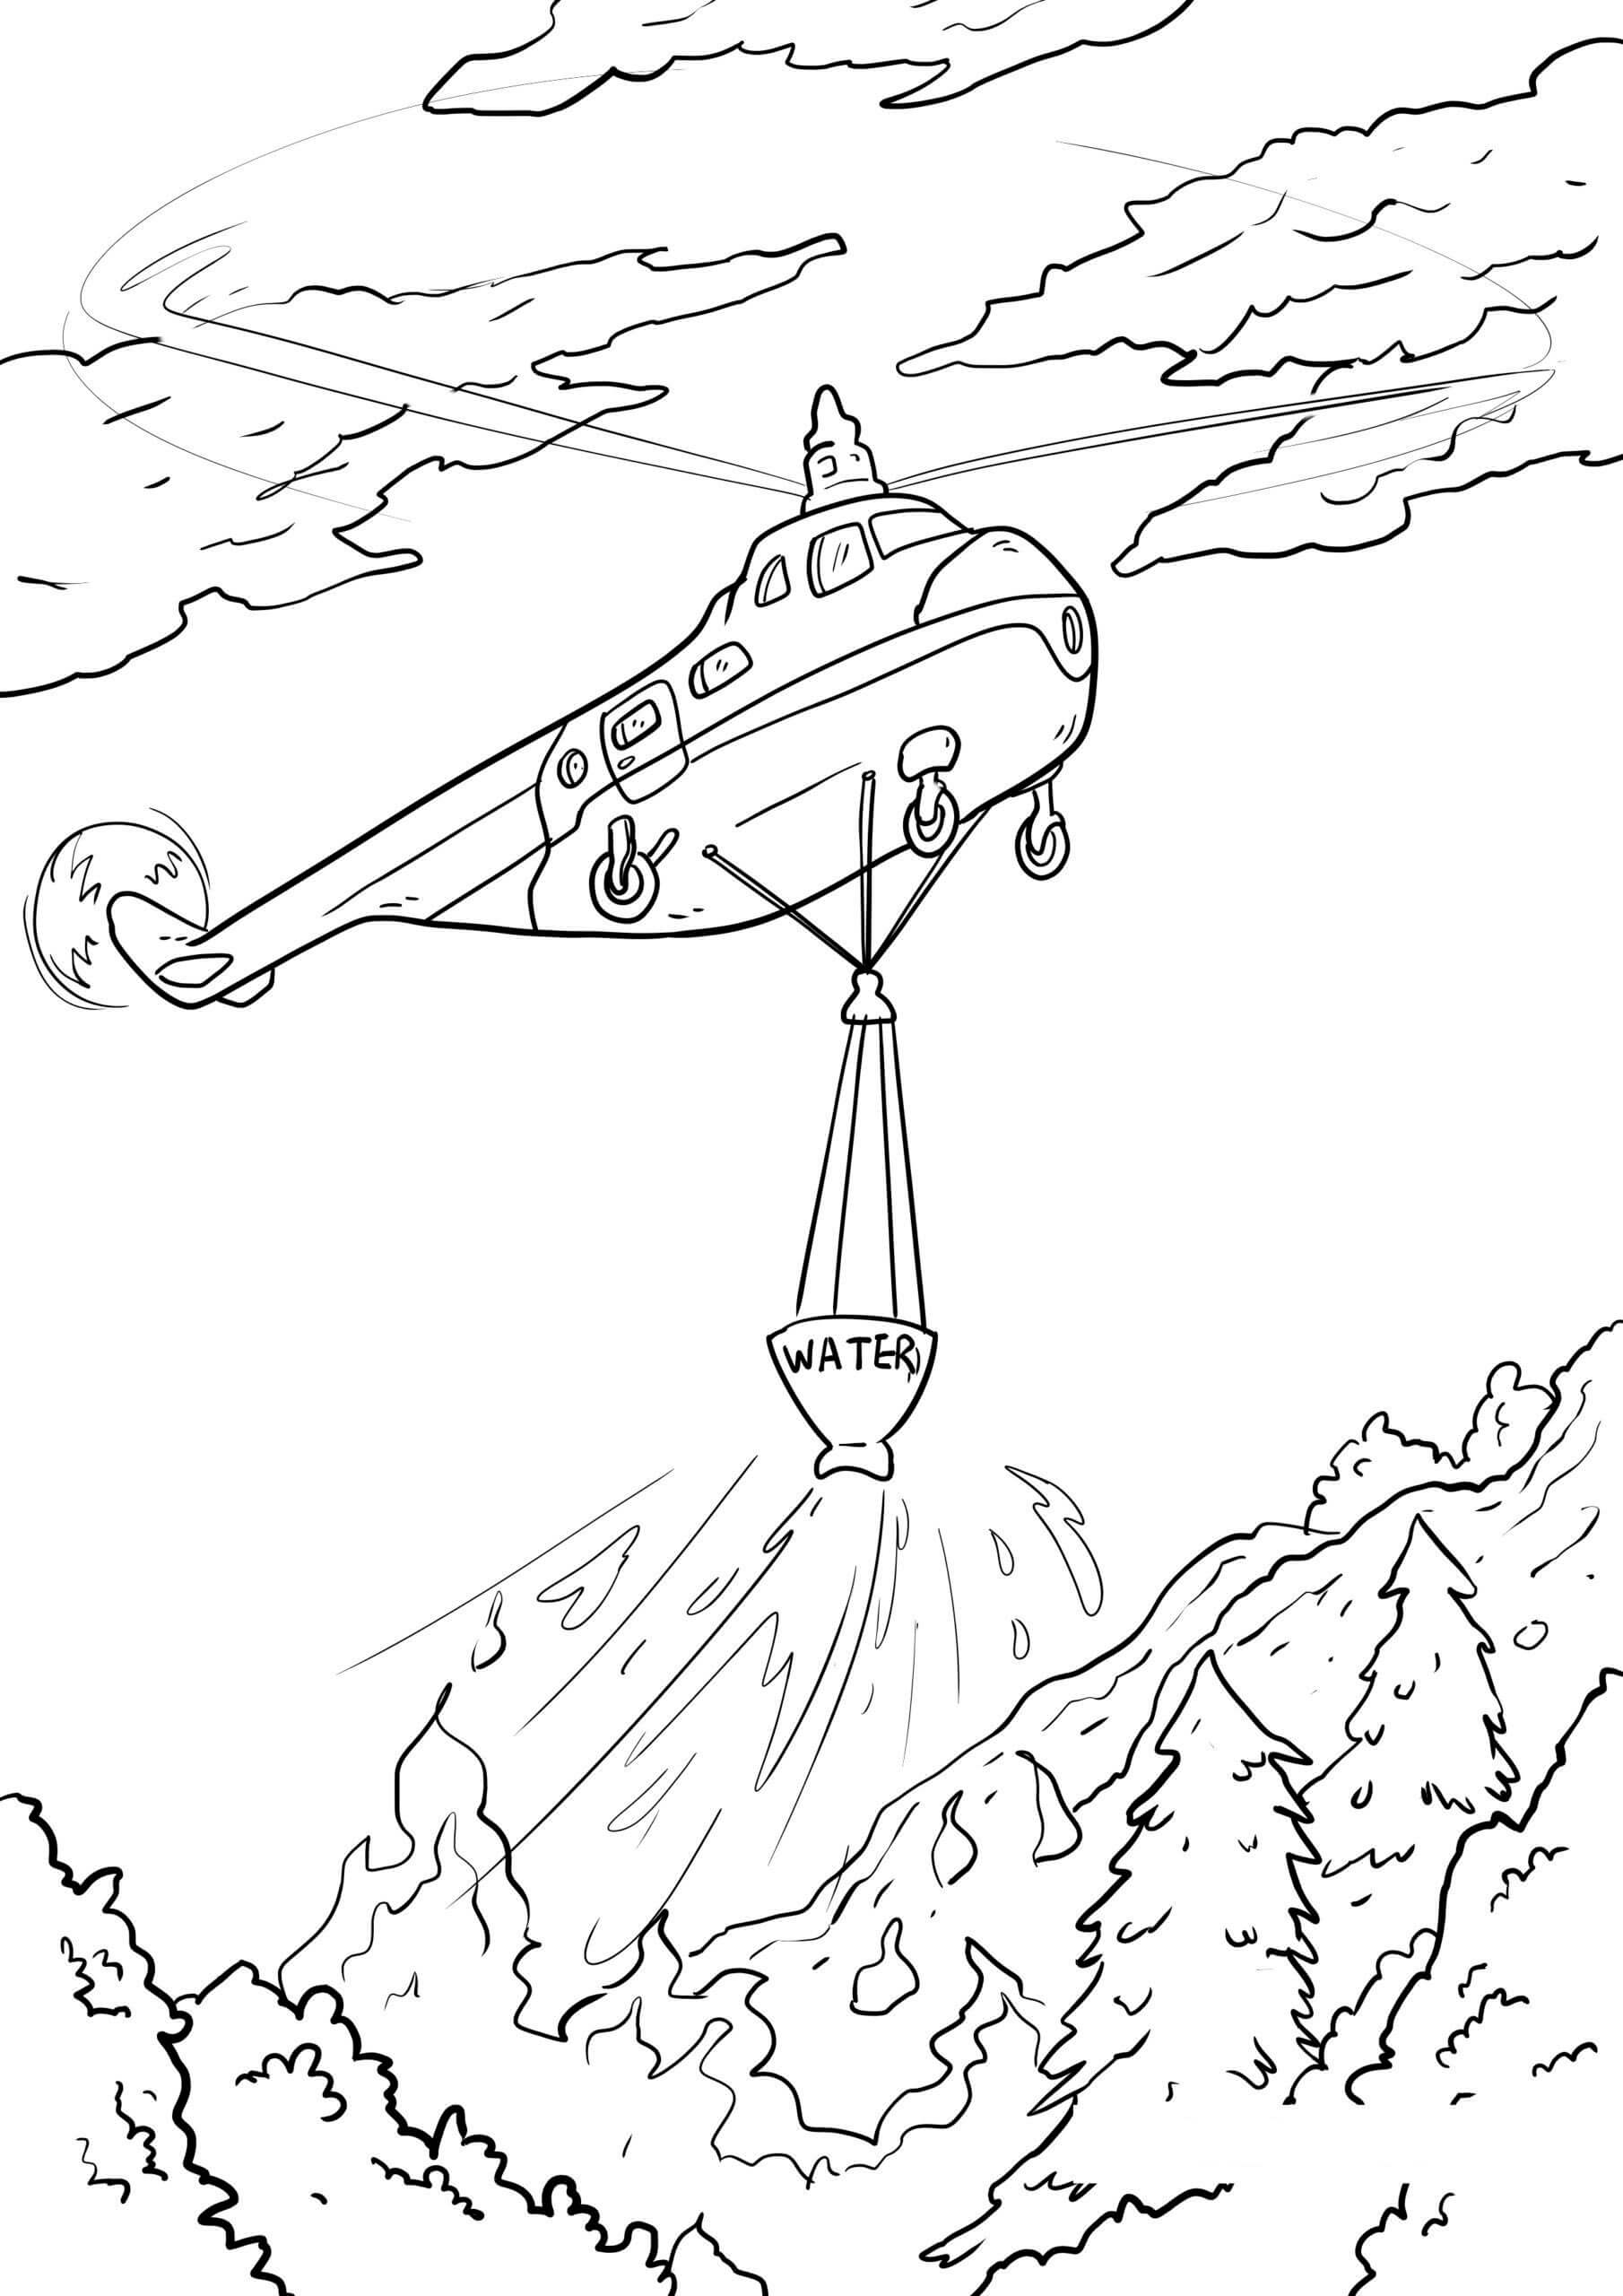 Firefighter Helicopter Coloring Page